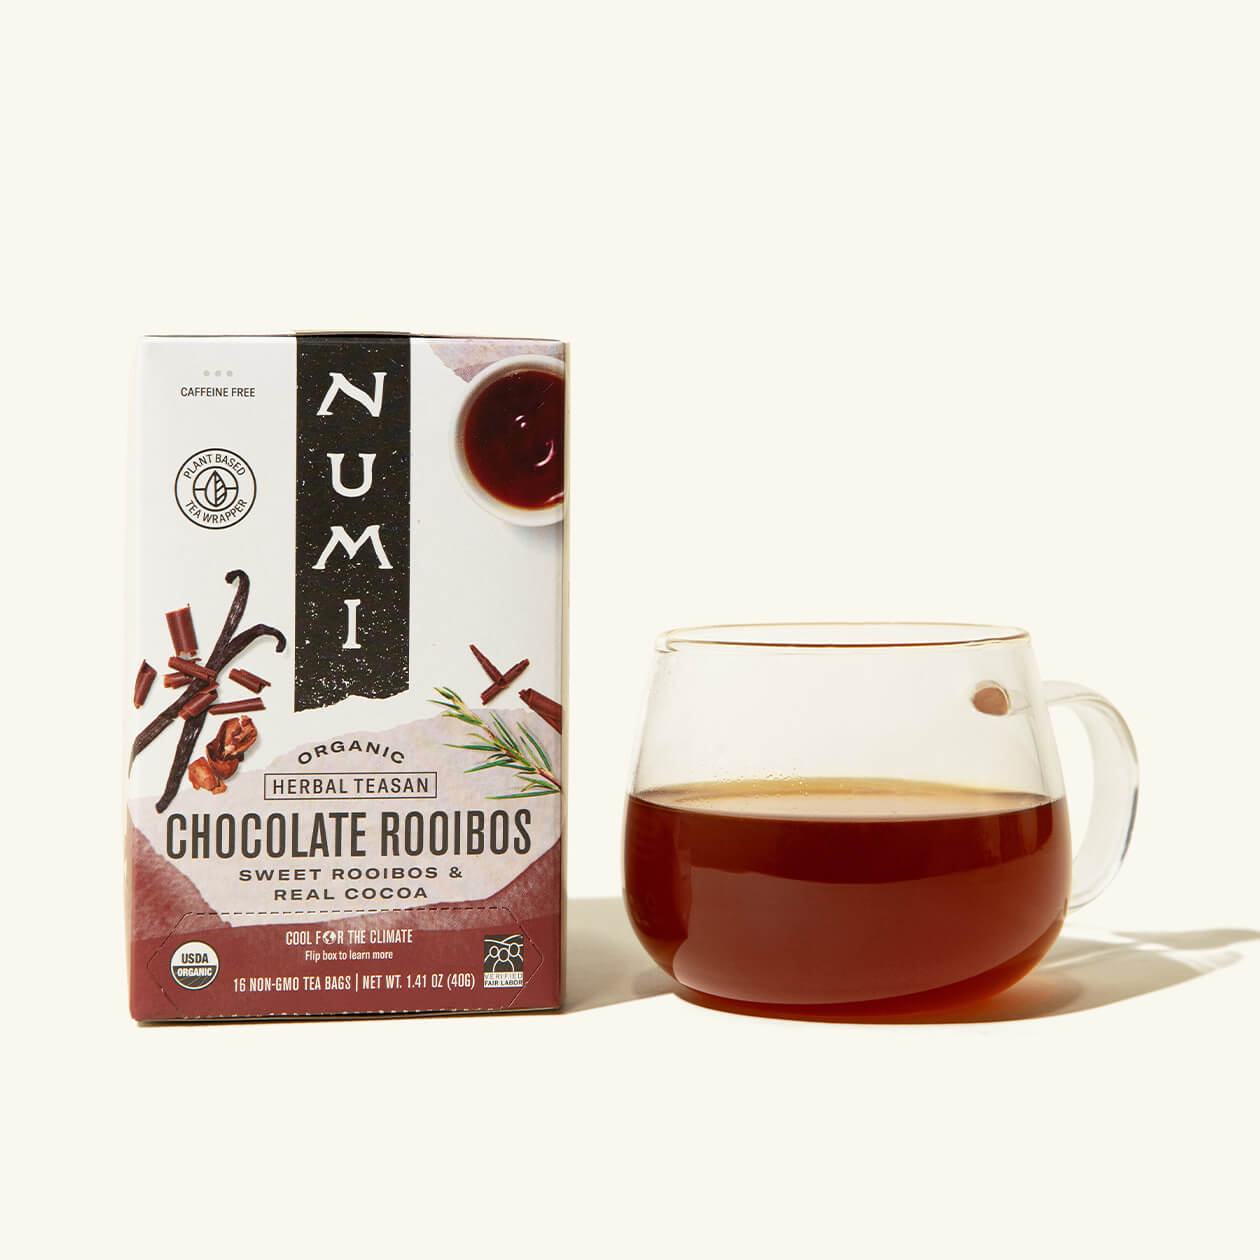 A box of Numi's Chocolate Rooibos next to a brewed cup of tea in a clear cup